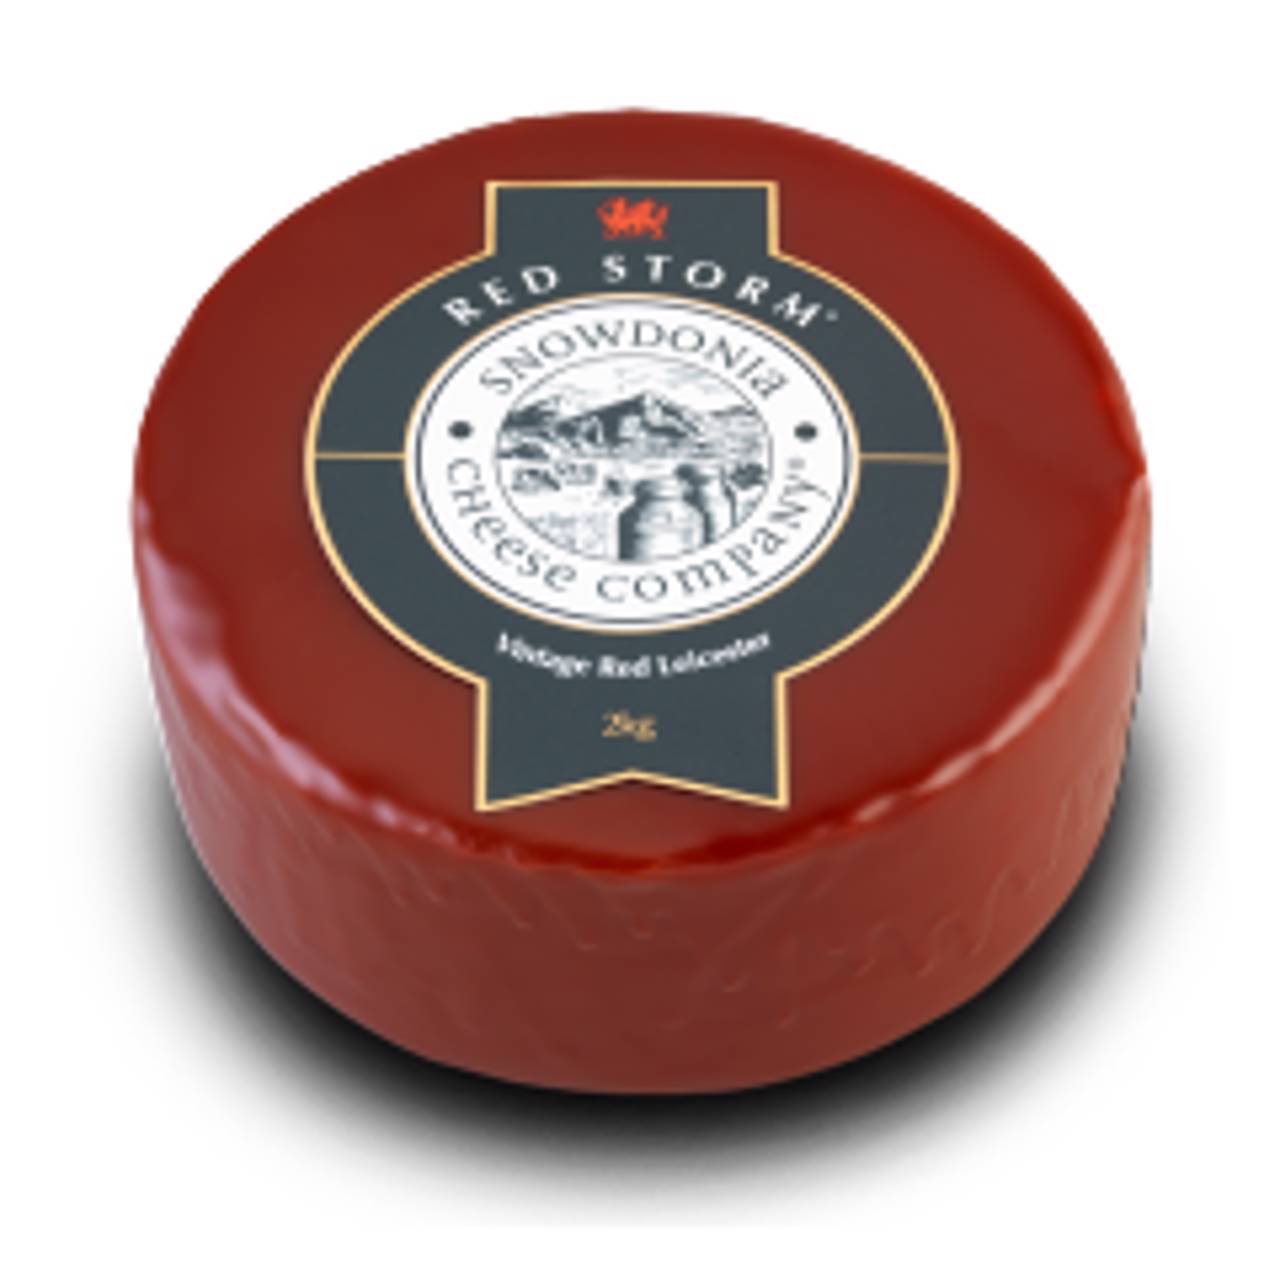 Red Storm Red Leicester - 1 Kilo